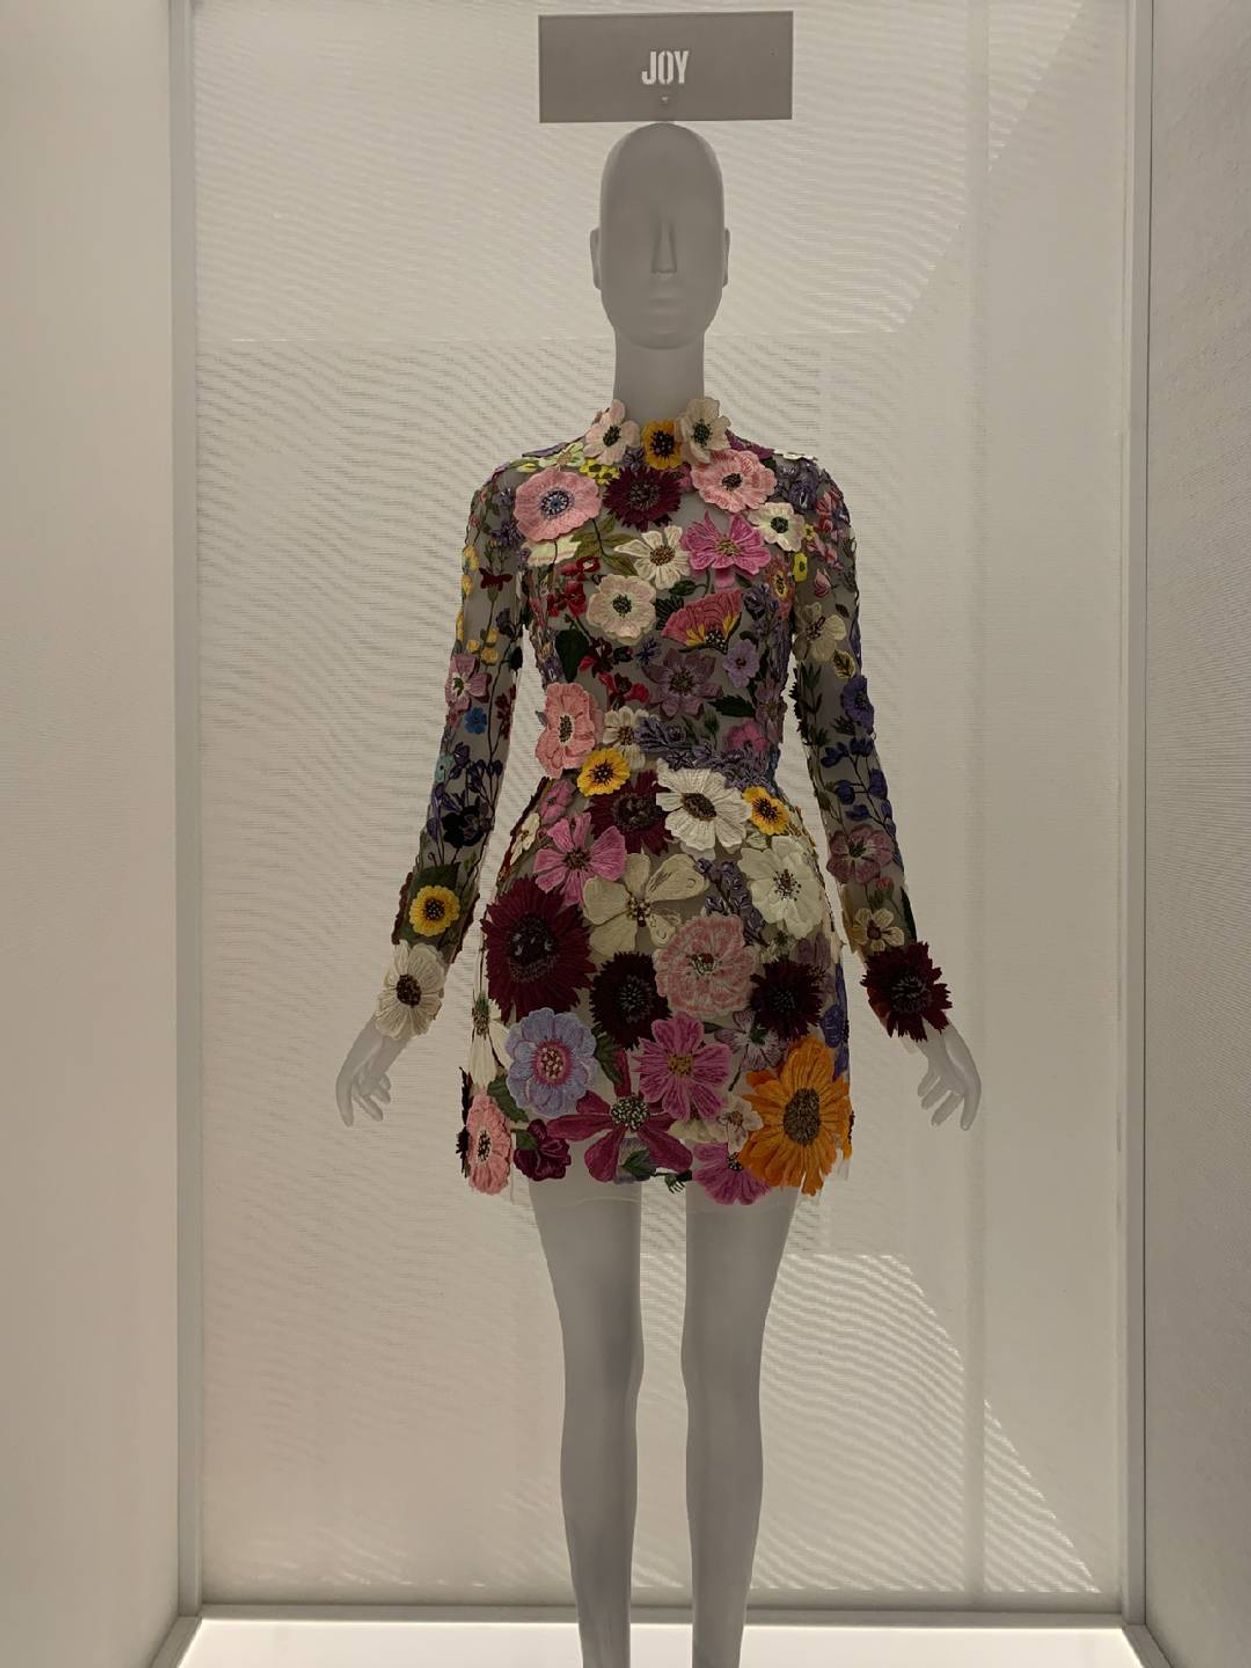 A mannequin wearing a dress of embroidered flowers.